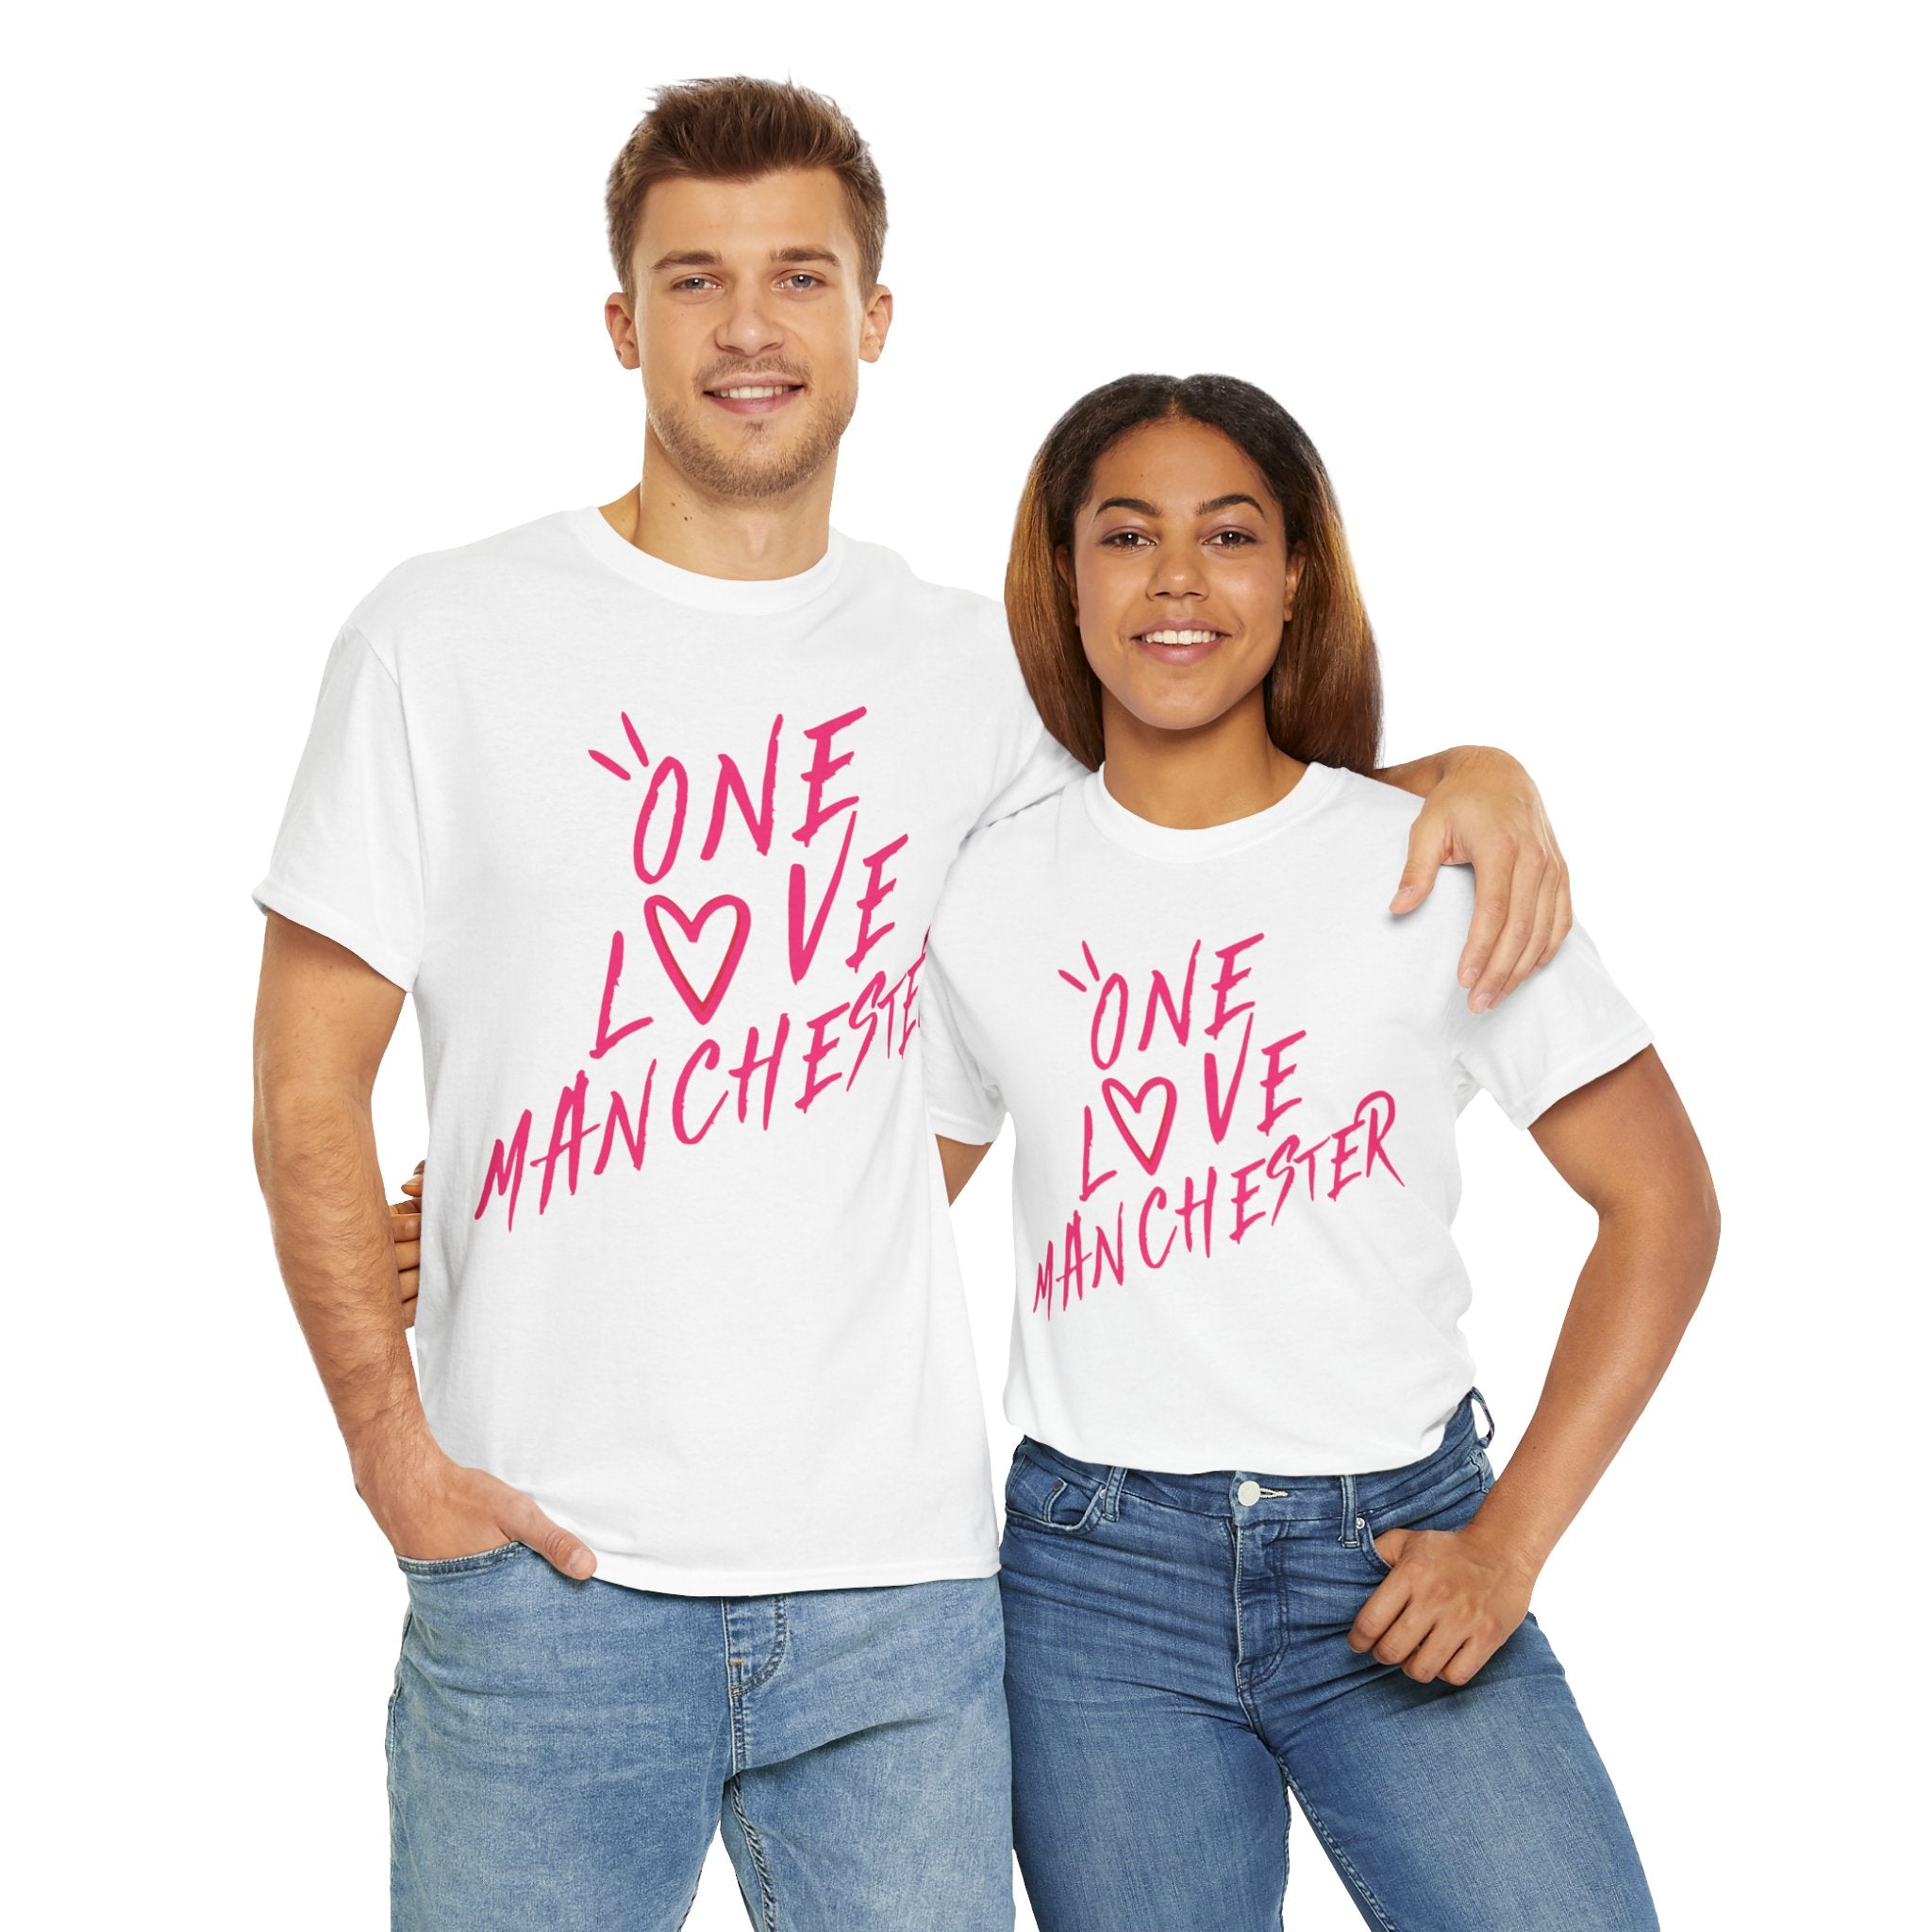 One Love Manchester Hot Pink - Unisex Heavy Cotton Tee